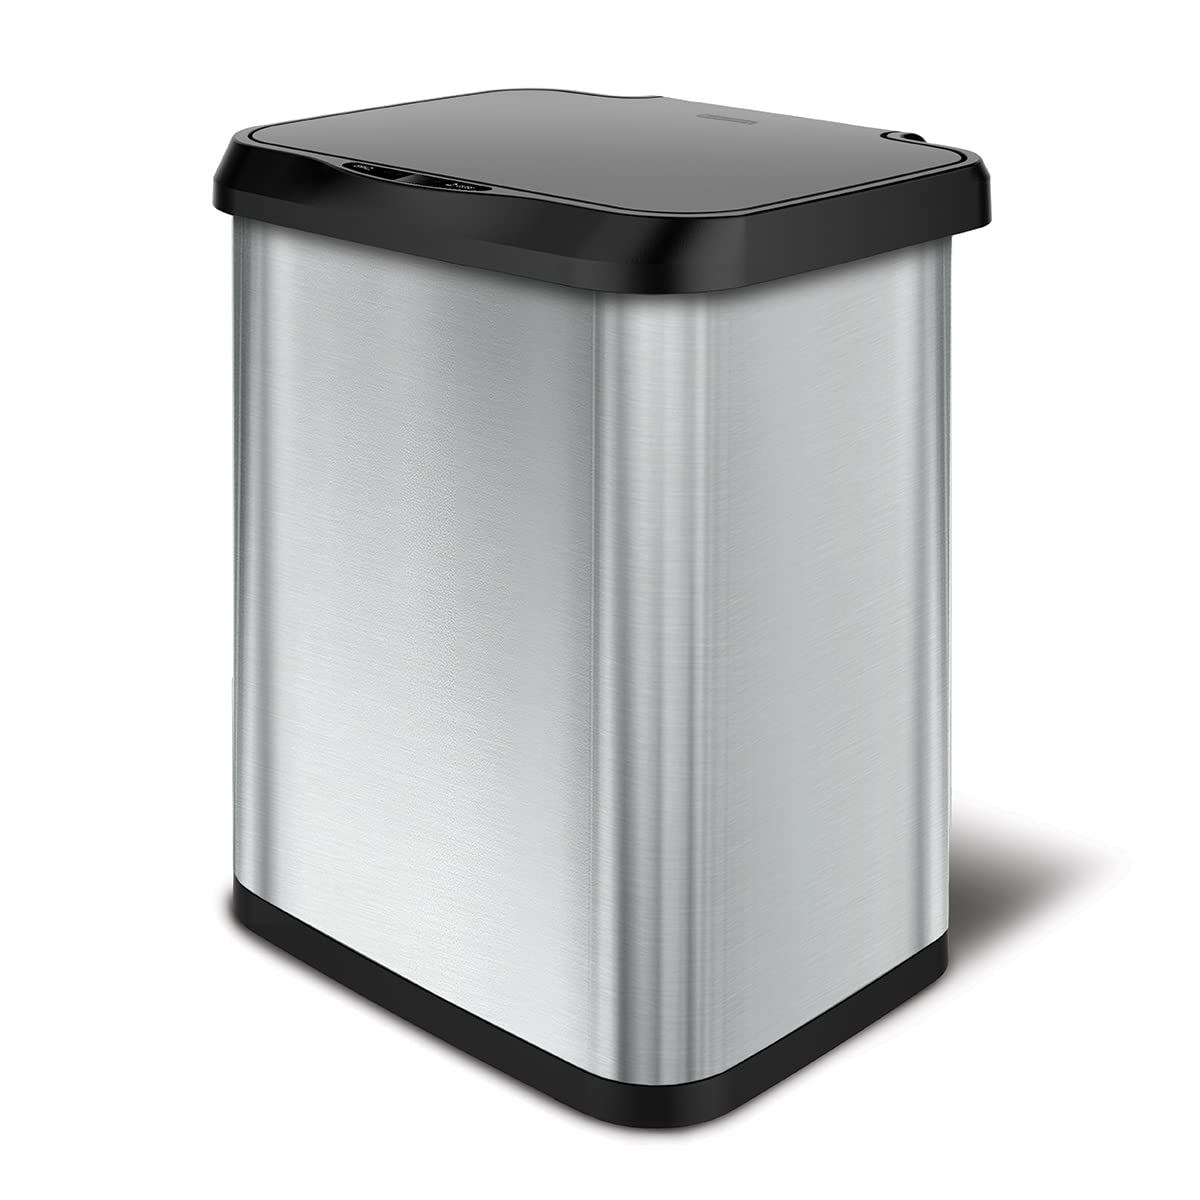 Glad Stainless Steel Trash Cans with Odor Protection | ...